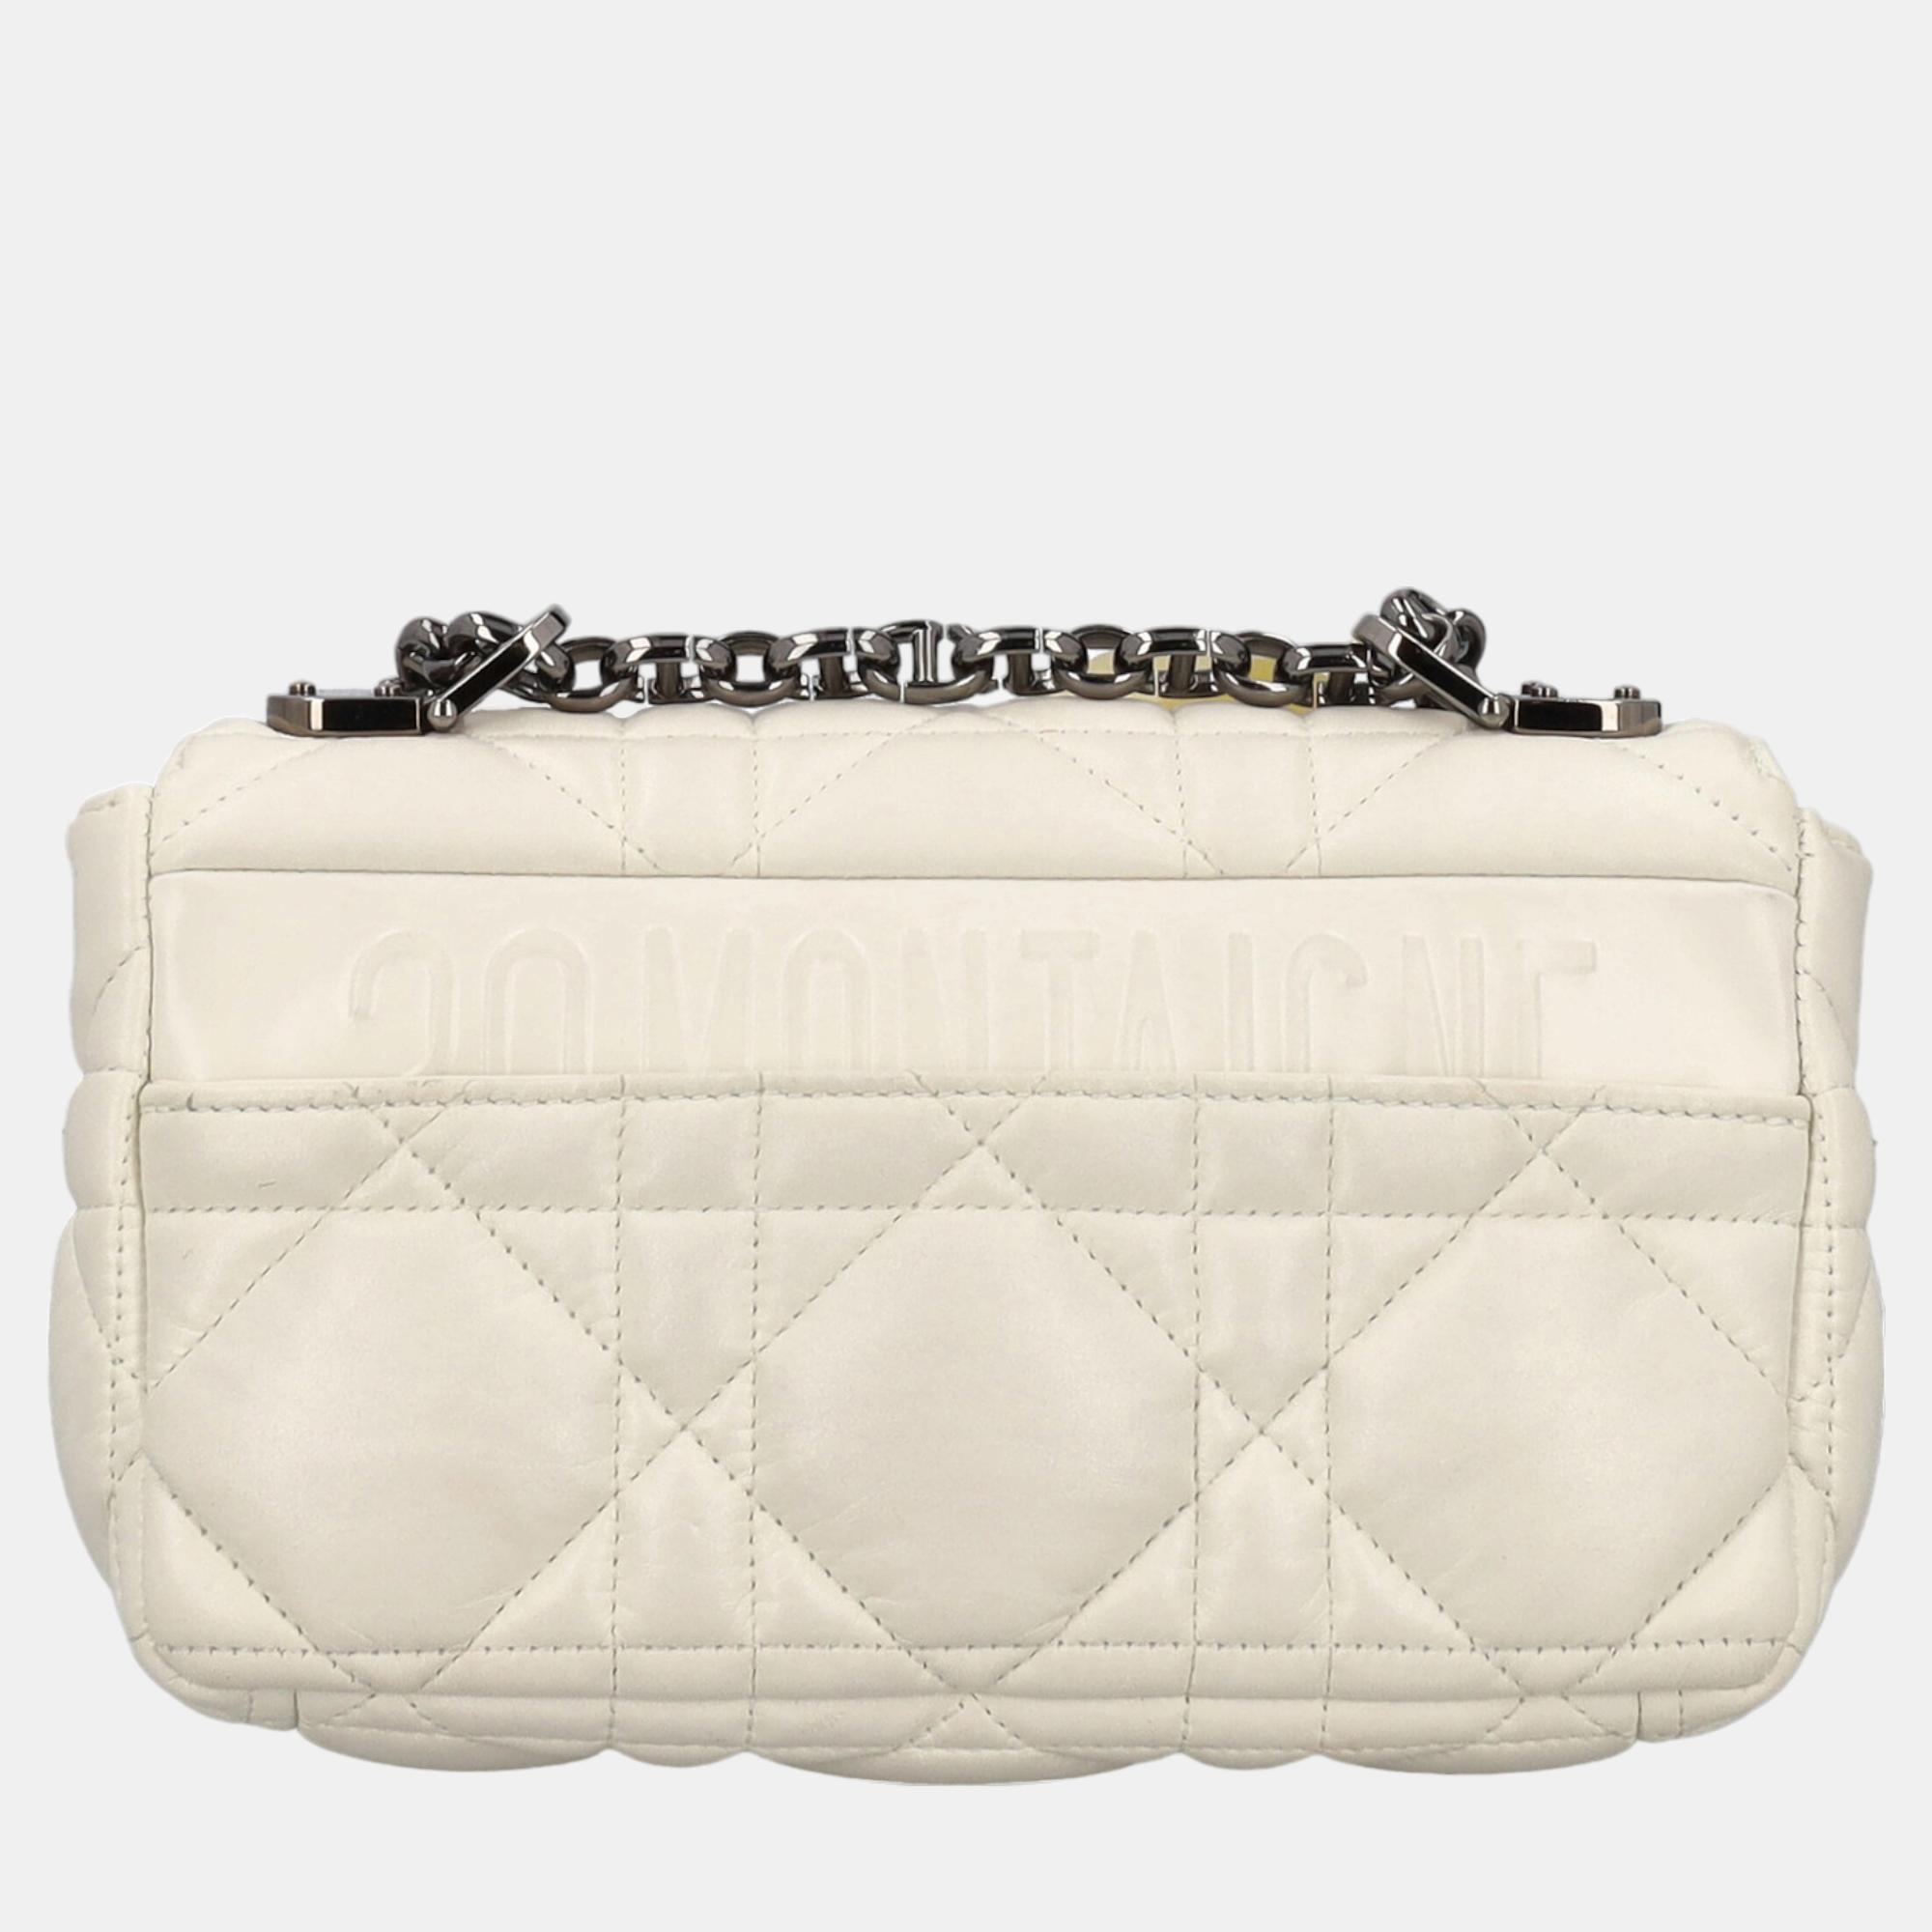 Dior  Women's Leather Cross Body Bag - White - One Size